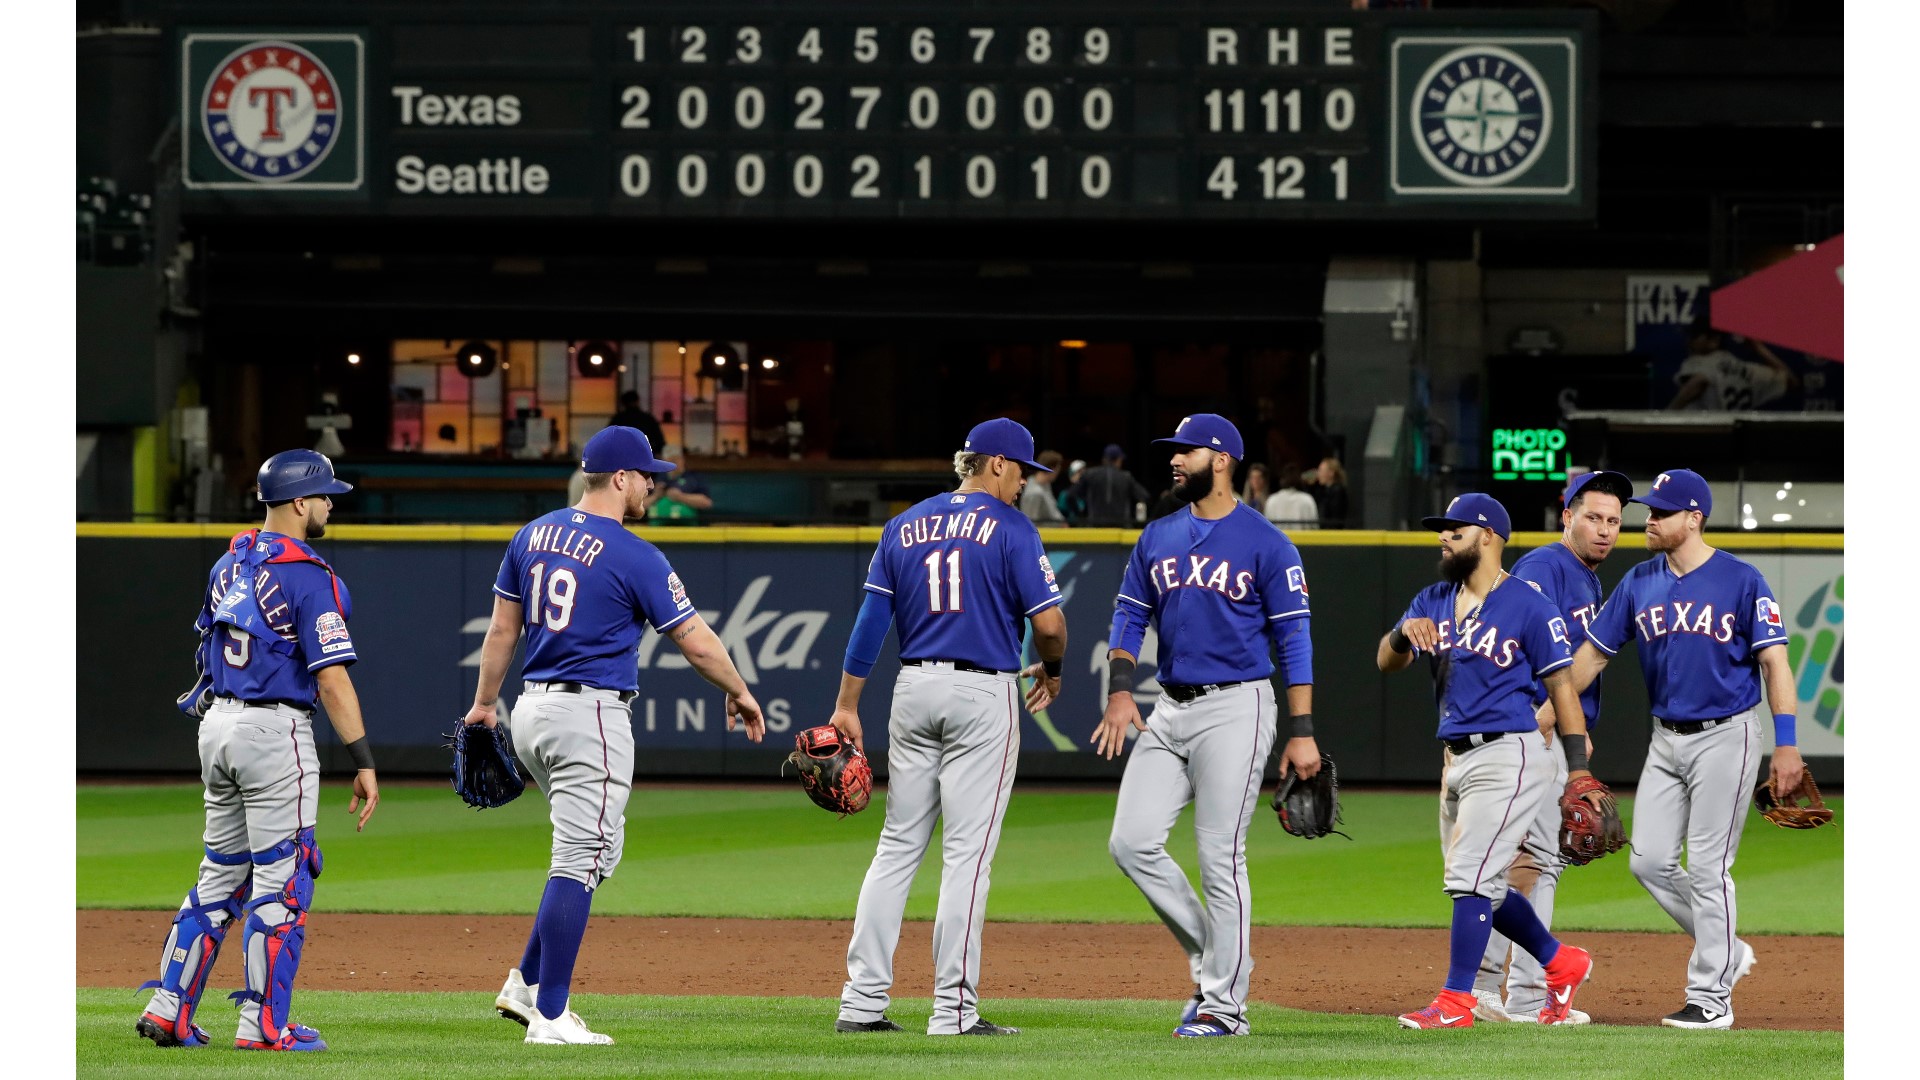 Washington state Gov. Jay Inslee banned large-group events in March due to the coronavirus pandemic, affecting the season opener between the Rangers and Mariners.